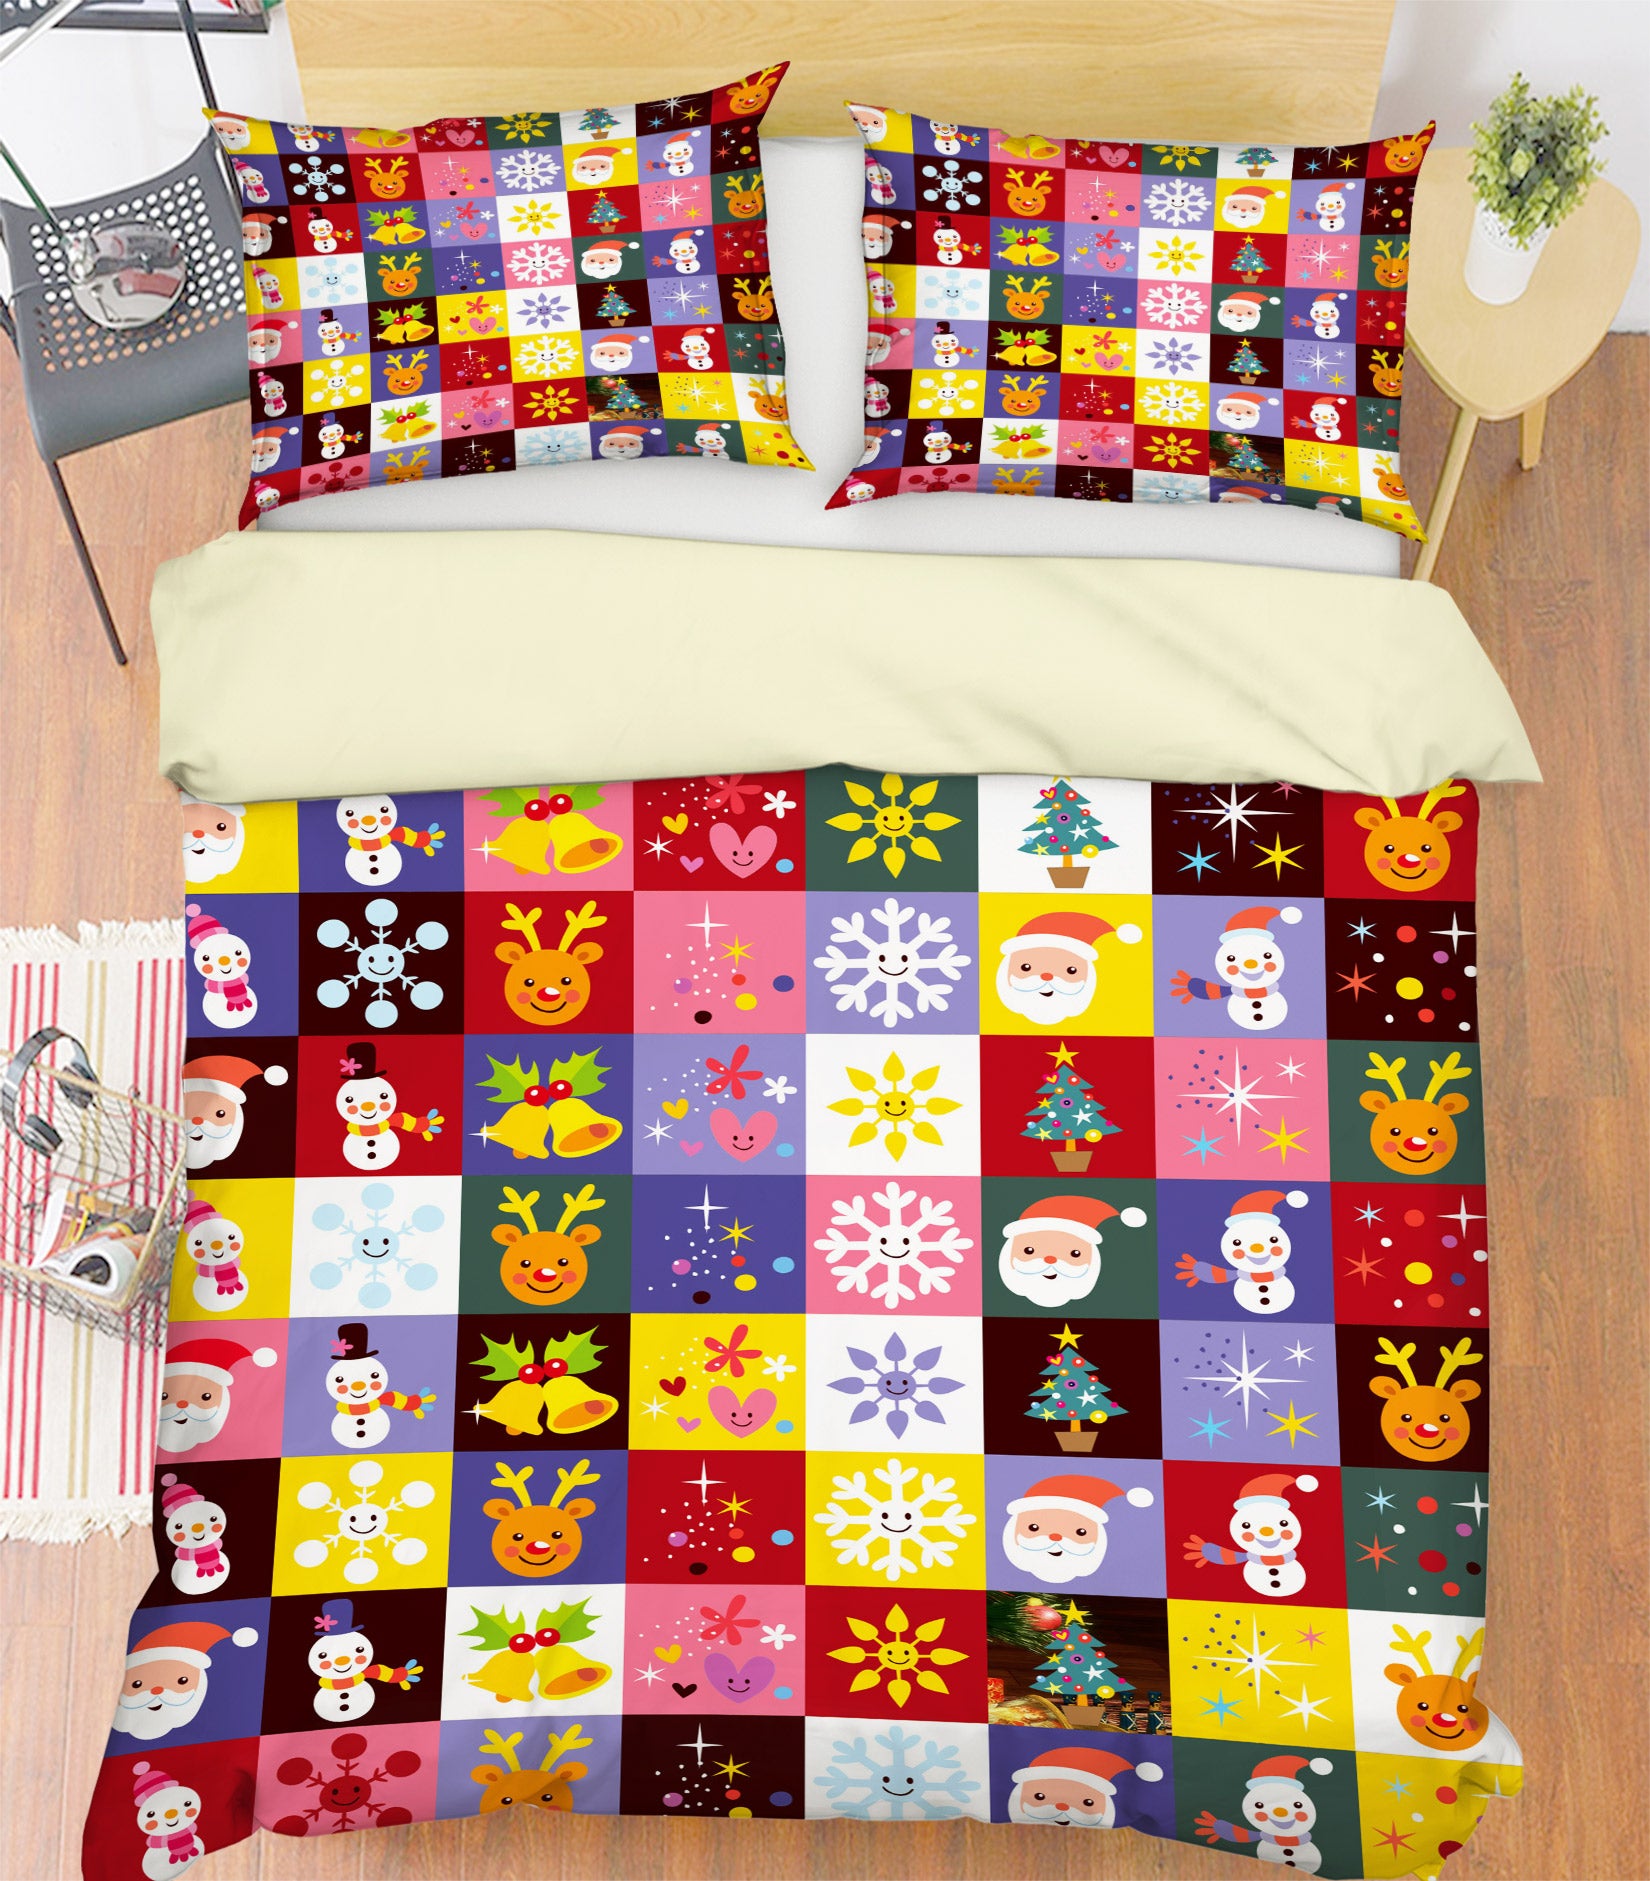 3D Colored Square Snow Deer 52103 Christmas Quilt Duvet Cover Xmas Bed Pillowcases